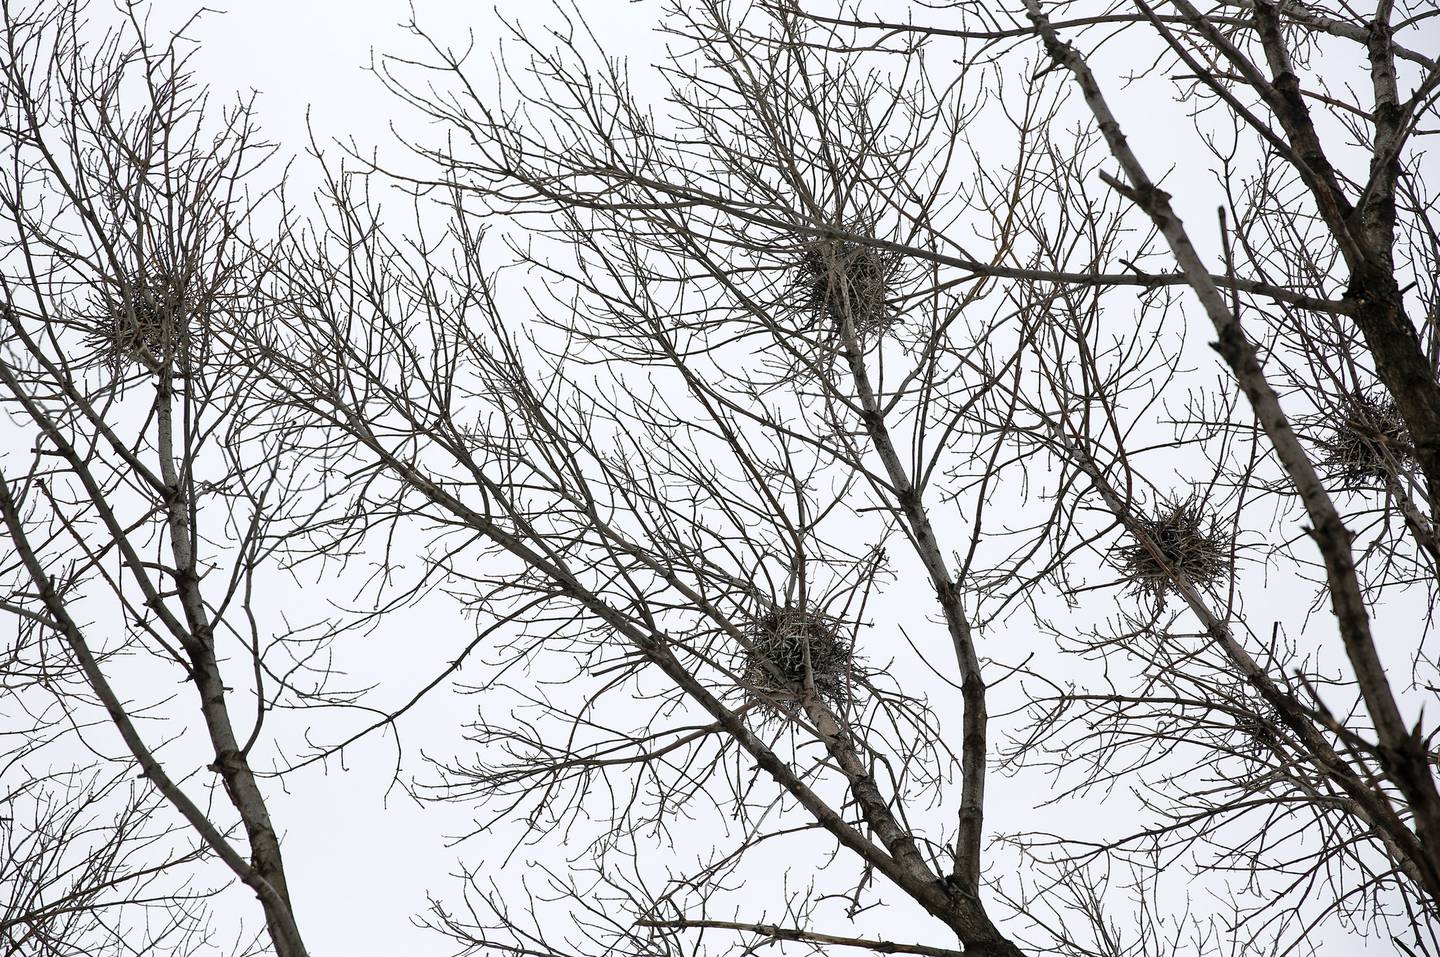 Black-crowned night heron nests where the emerald ash borer has infected trees in Lincoln Park just south of Lincoln Park Zoo in 2014. 